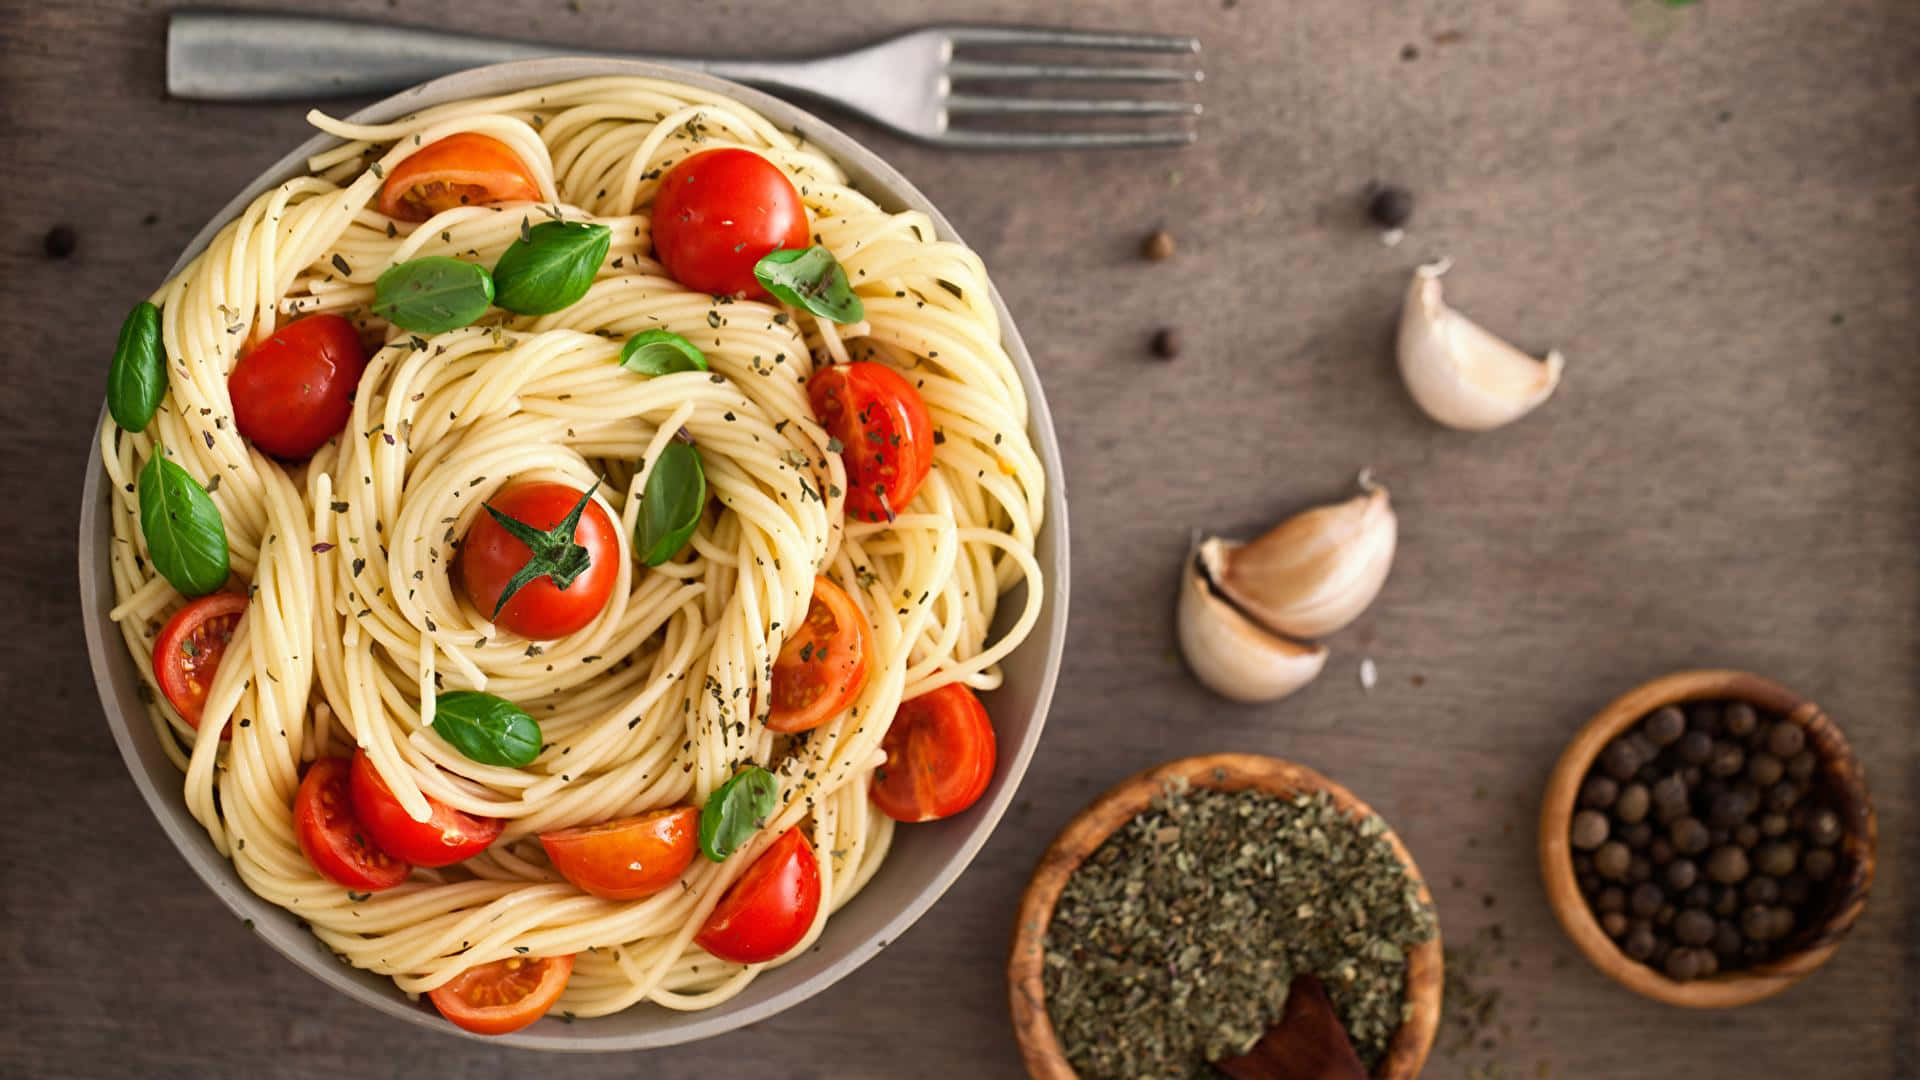 Freshly cooked, delicious spaghetti and cherry tomatoes